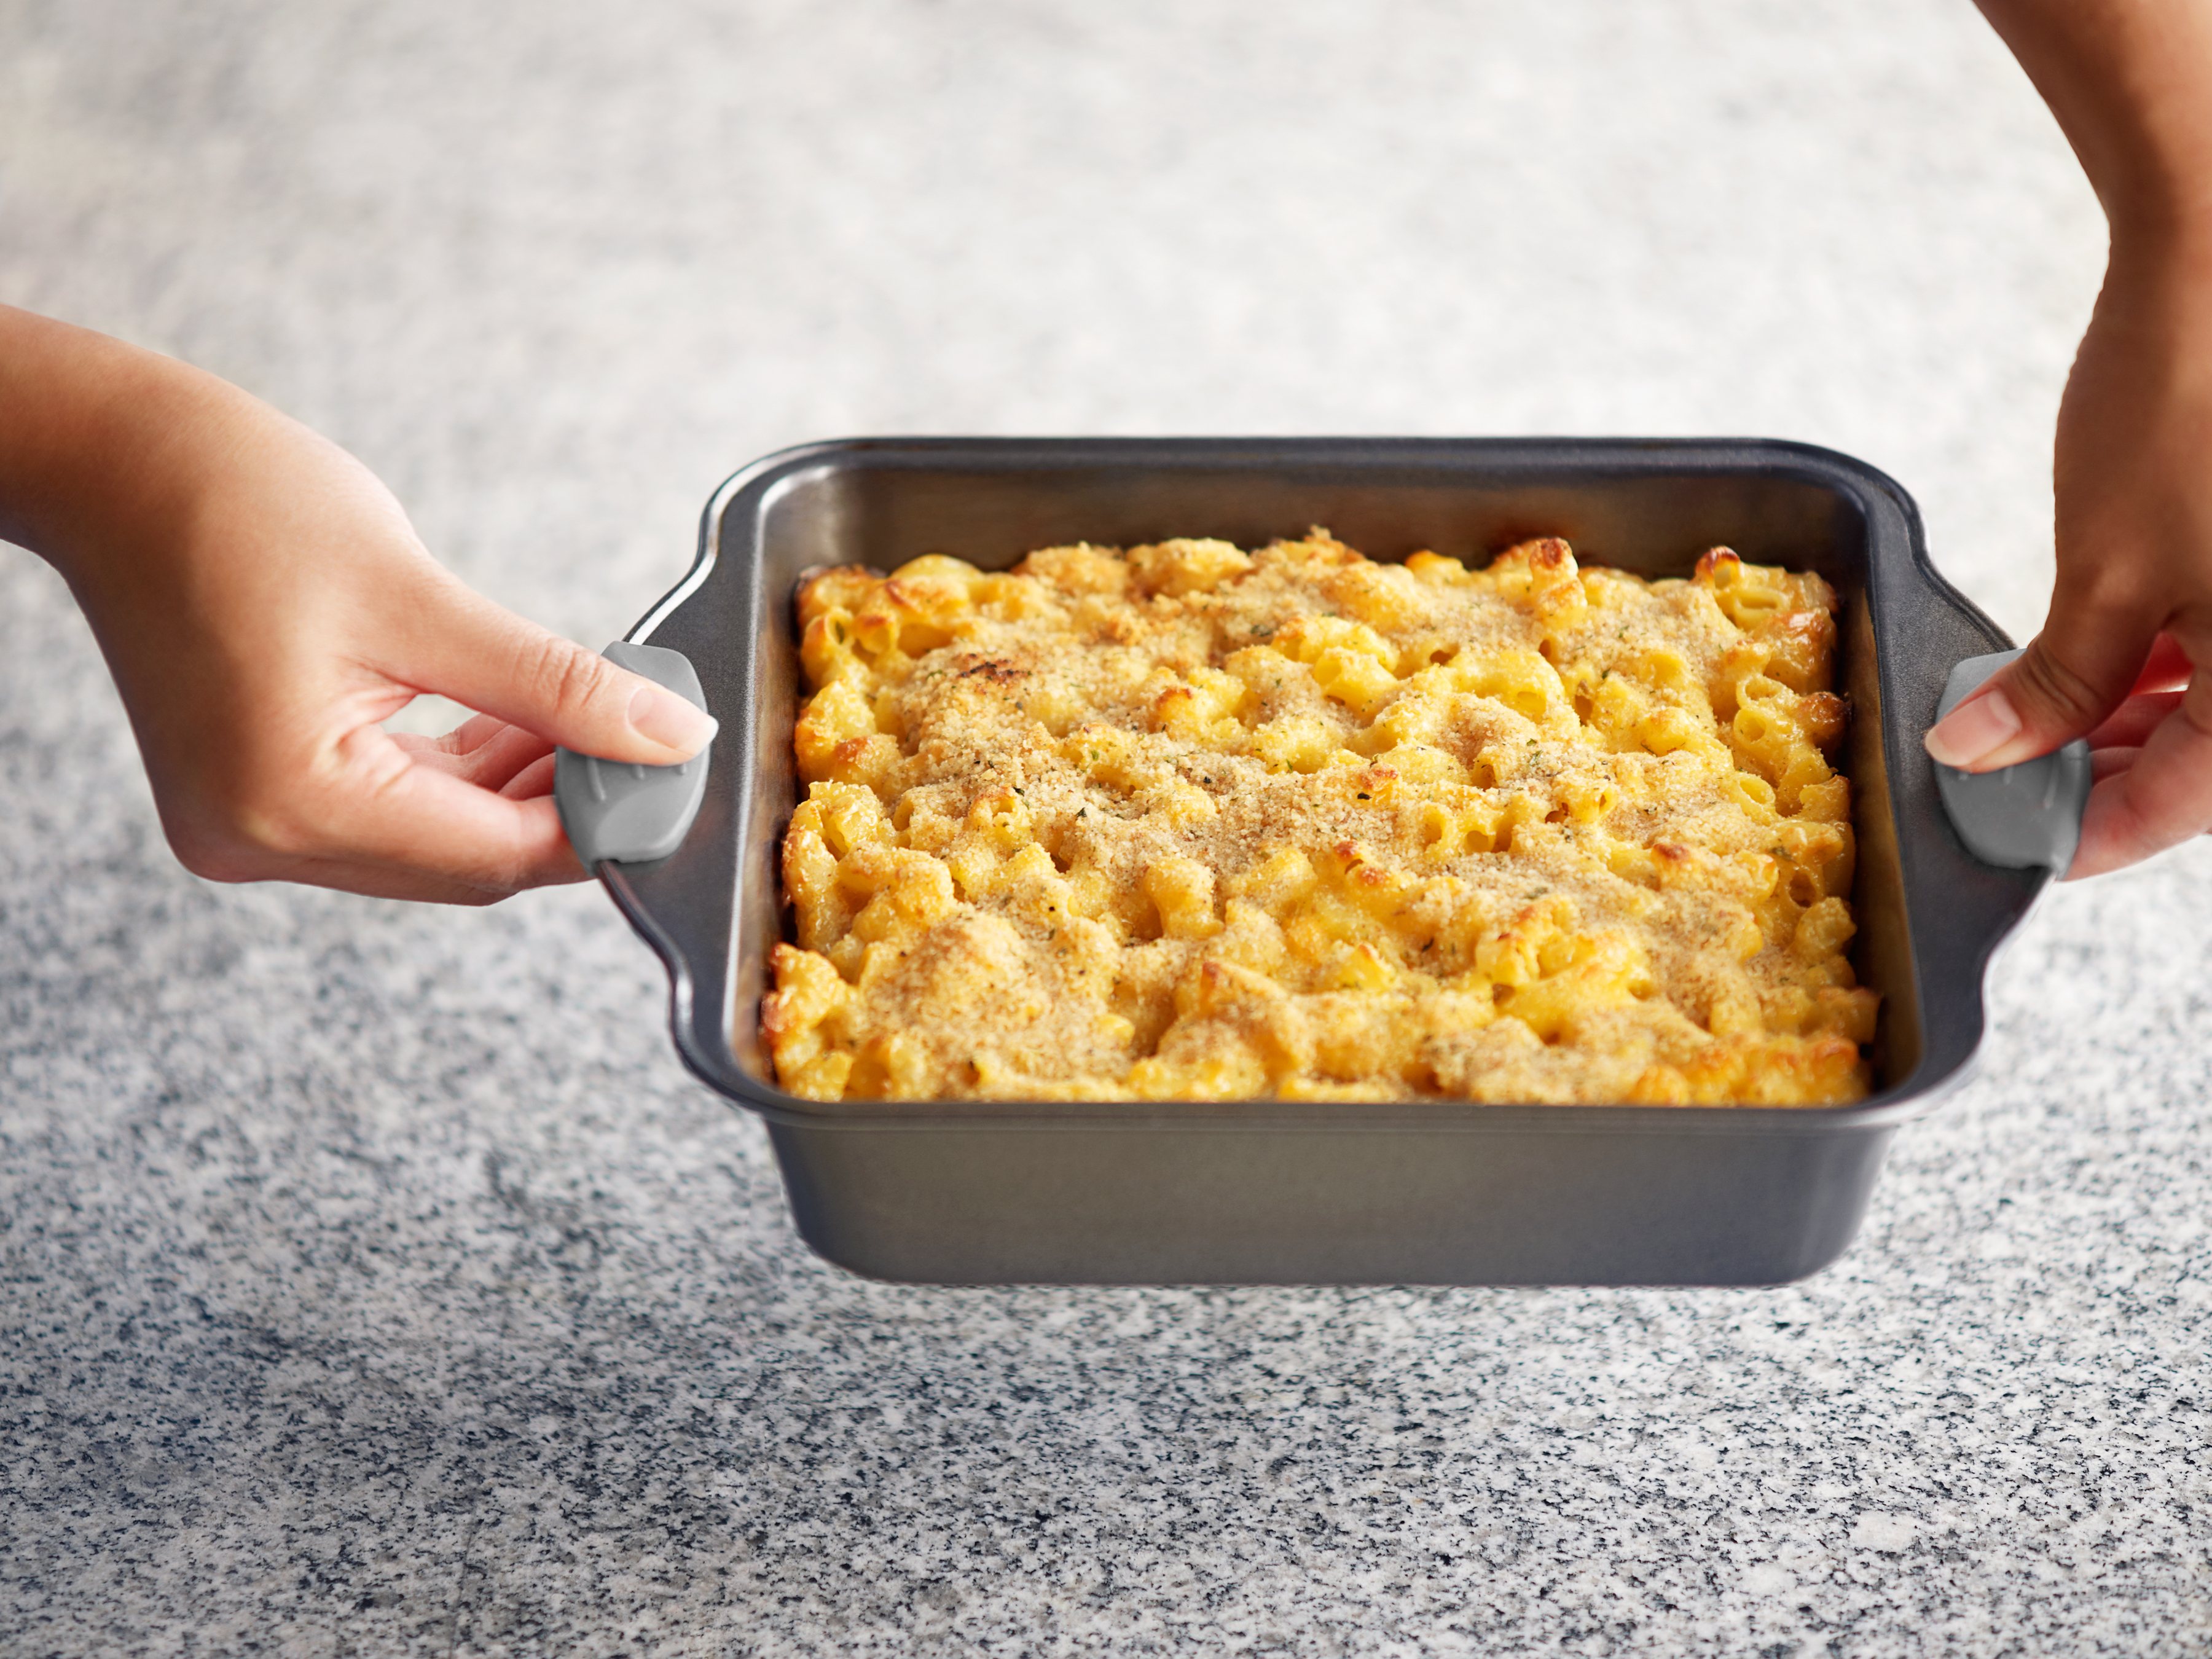 baked macaroni and cheese no roux